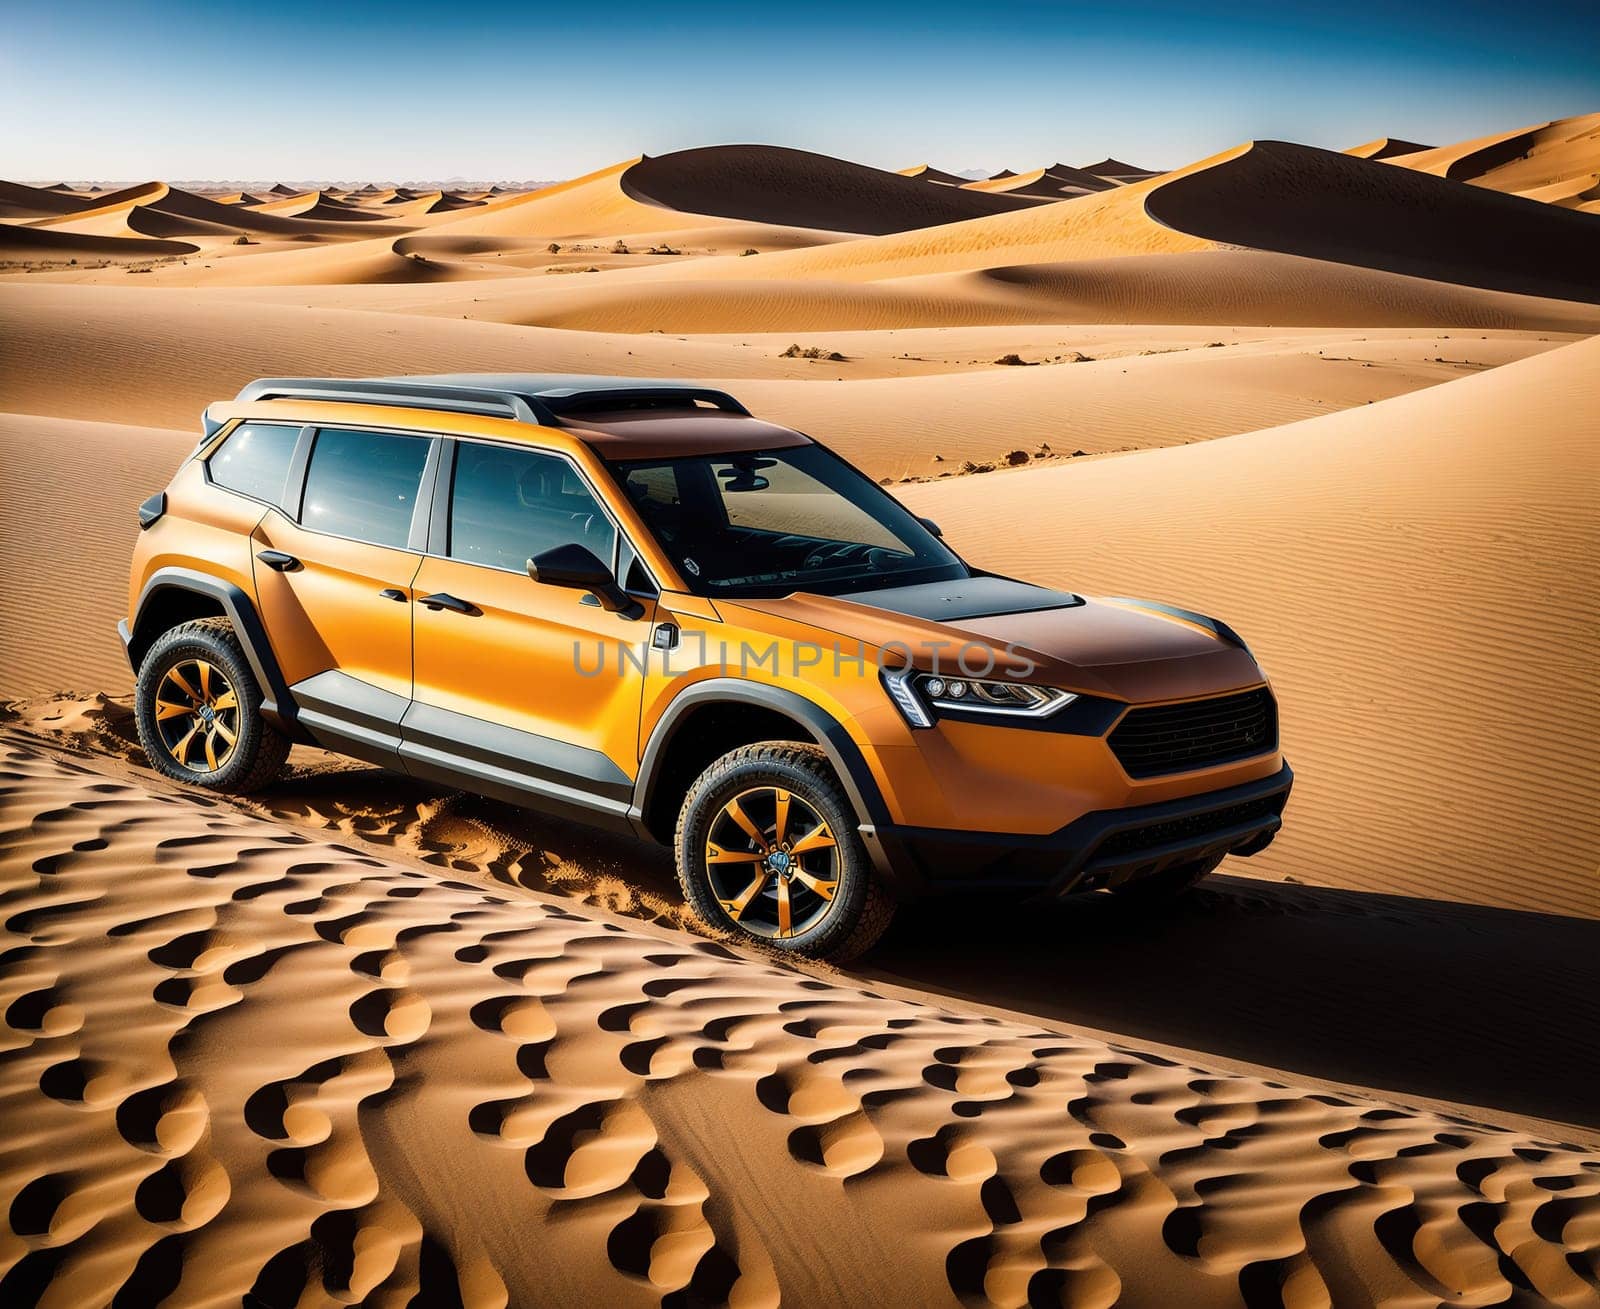 The image shows a yellow SUV driving through a desert with sand dunes in the background.